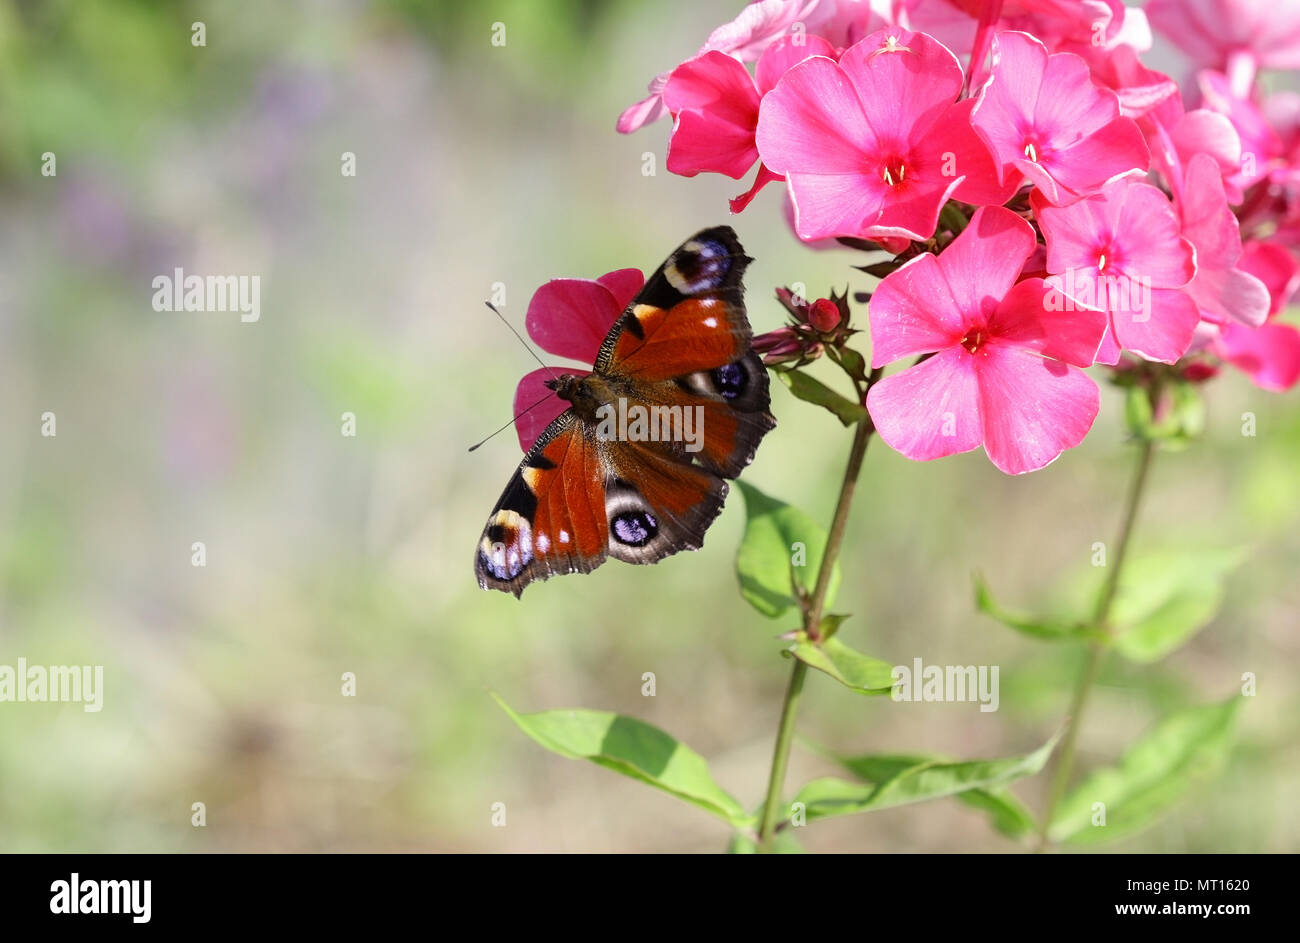 Butterfly on a phlox flower. Flower vegetable background horizontally Stock Photo